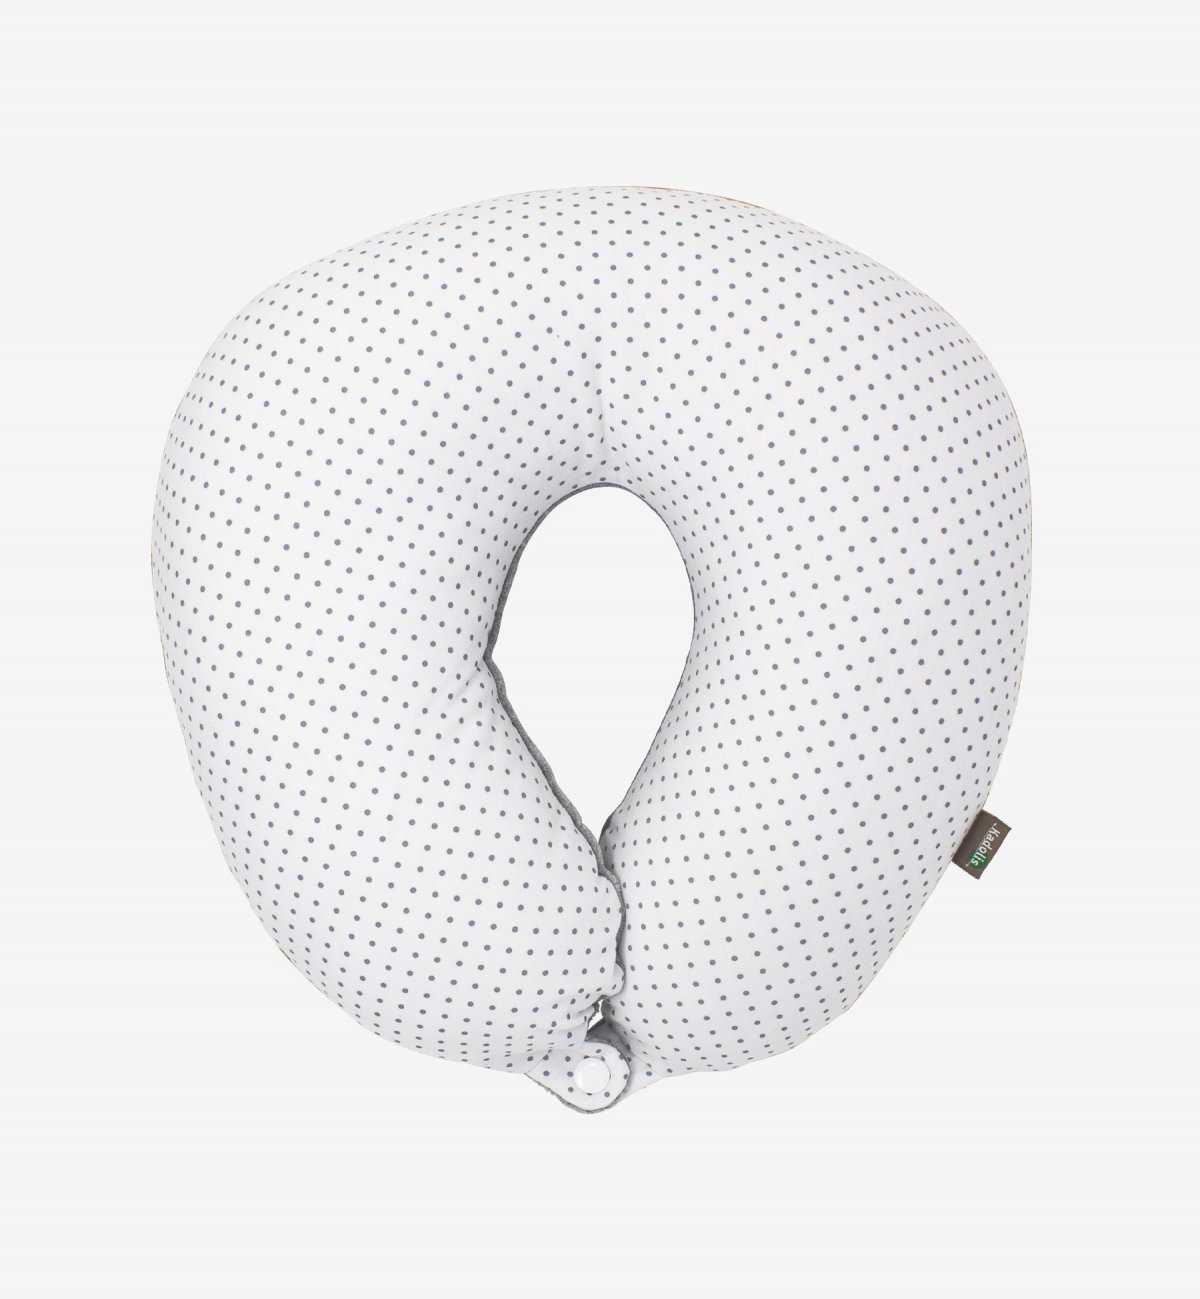 Adult travel pillow with Organic Cotton cover